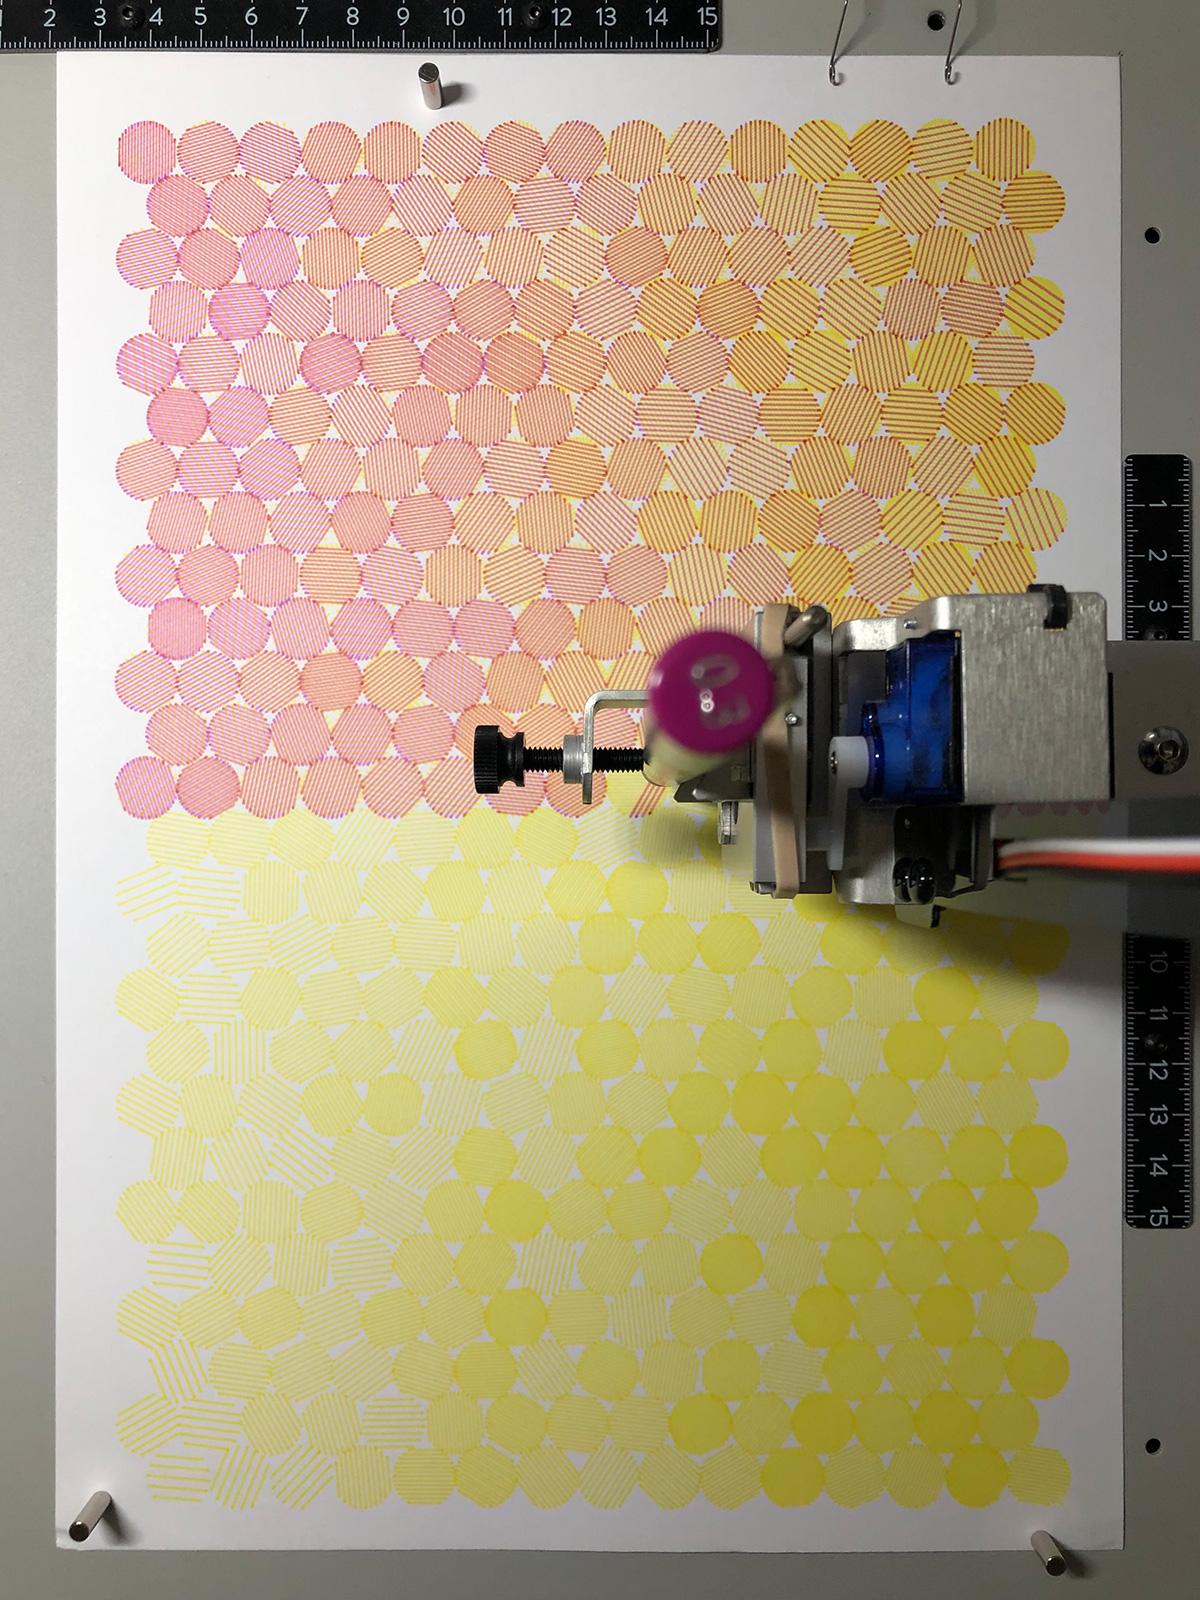 In-progress view shows magenta lines being drawn over the completed yellow layer